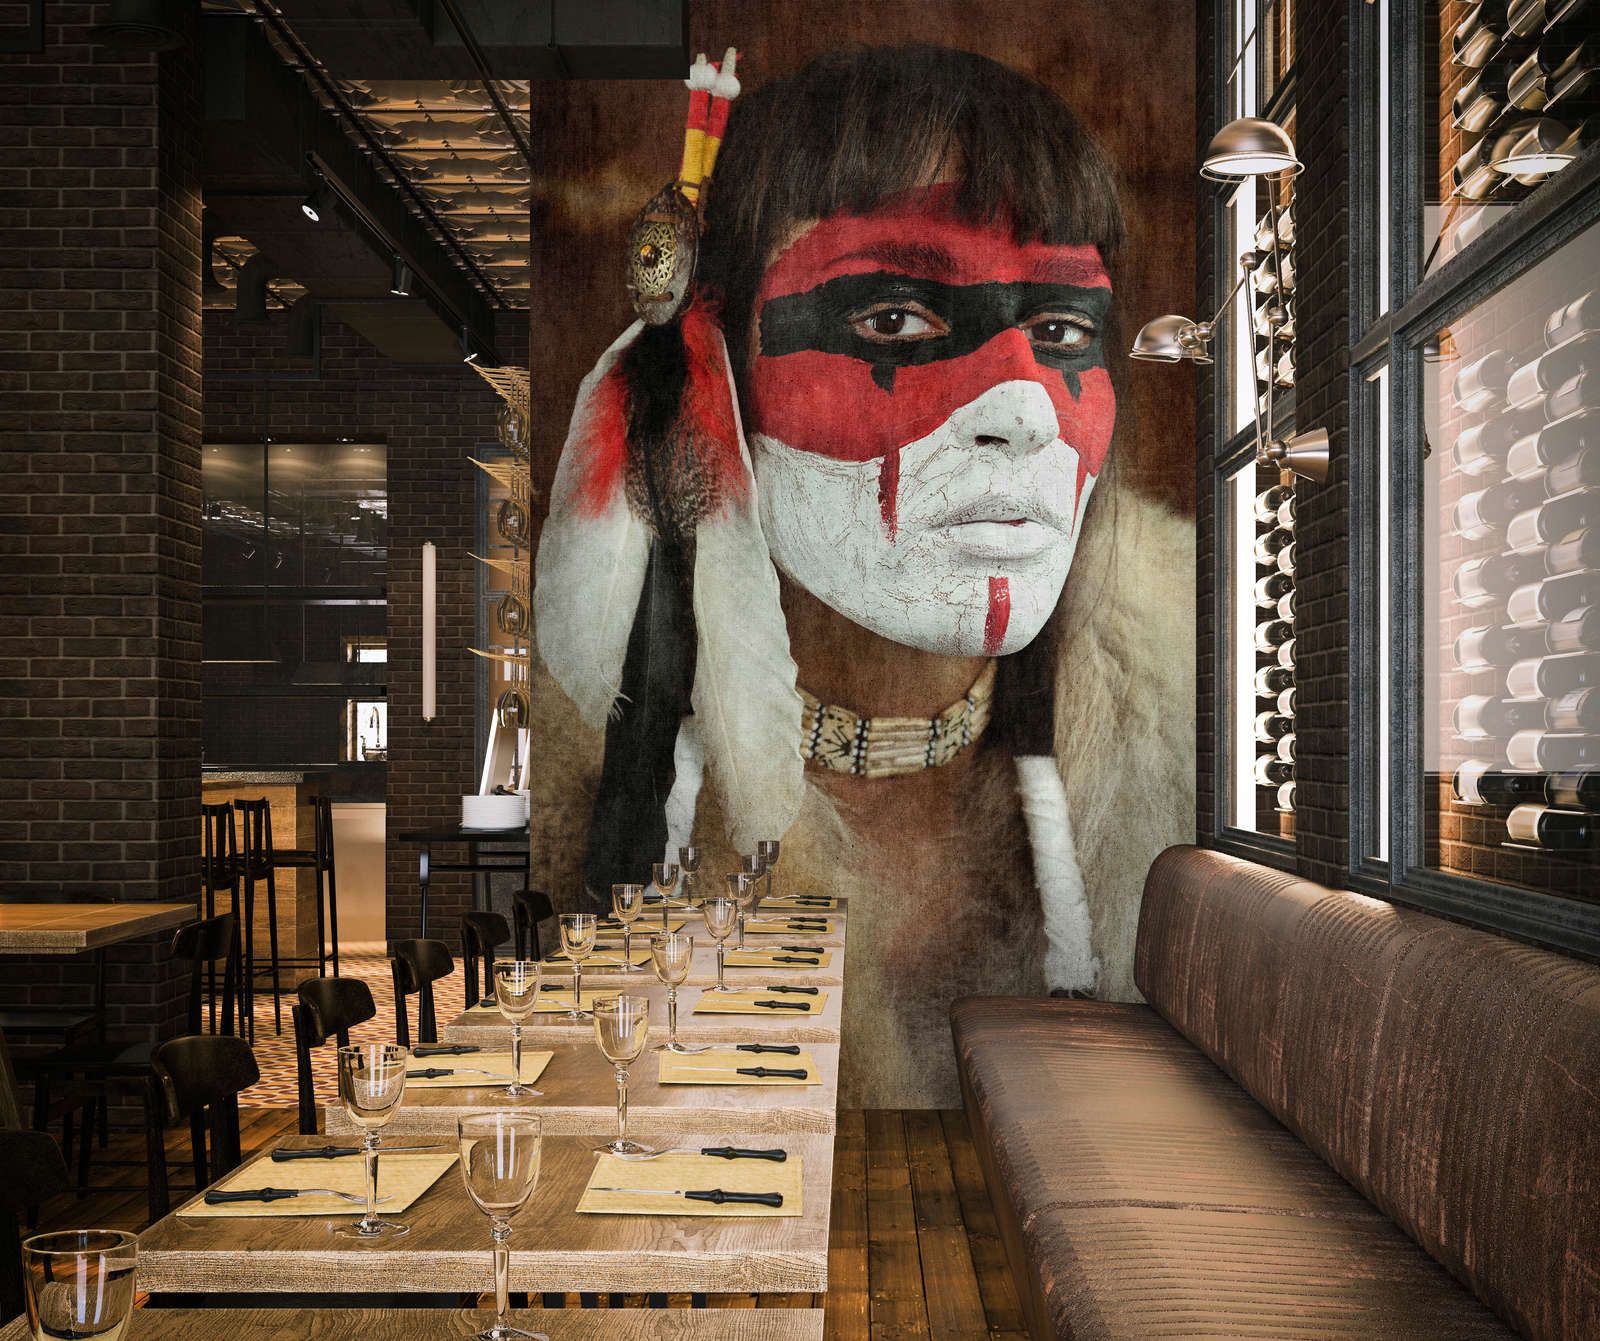             Photo wallpaper »ayasha« - Portrait of a warrior - motif with tapestry structure | matt, smooth non-woven fabric
        